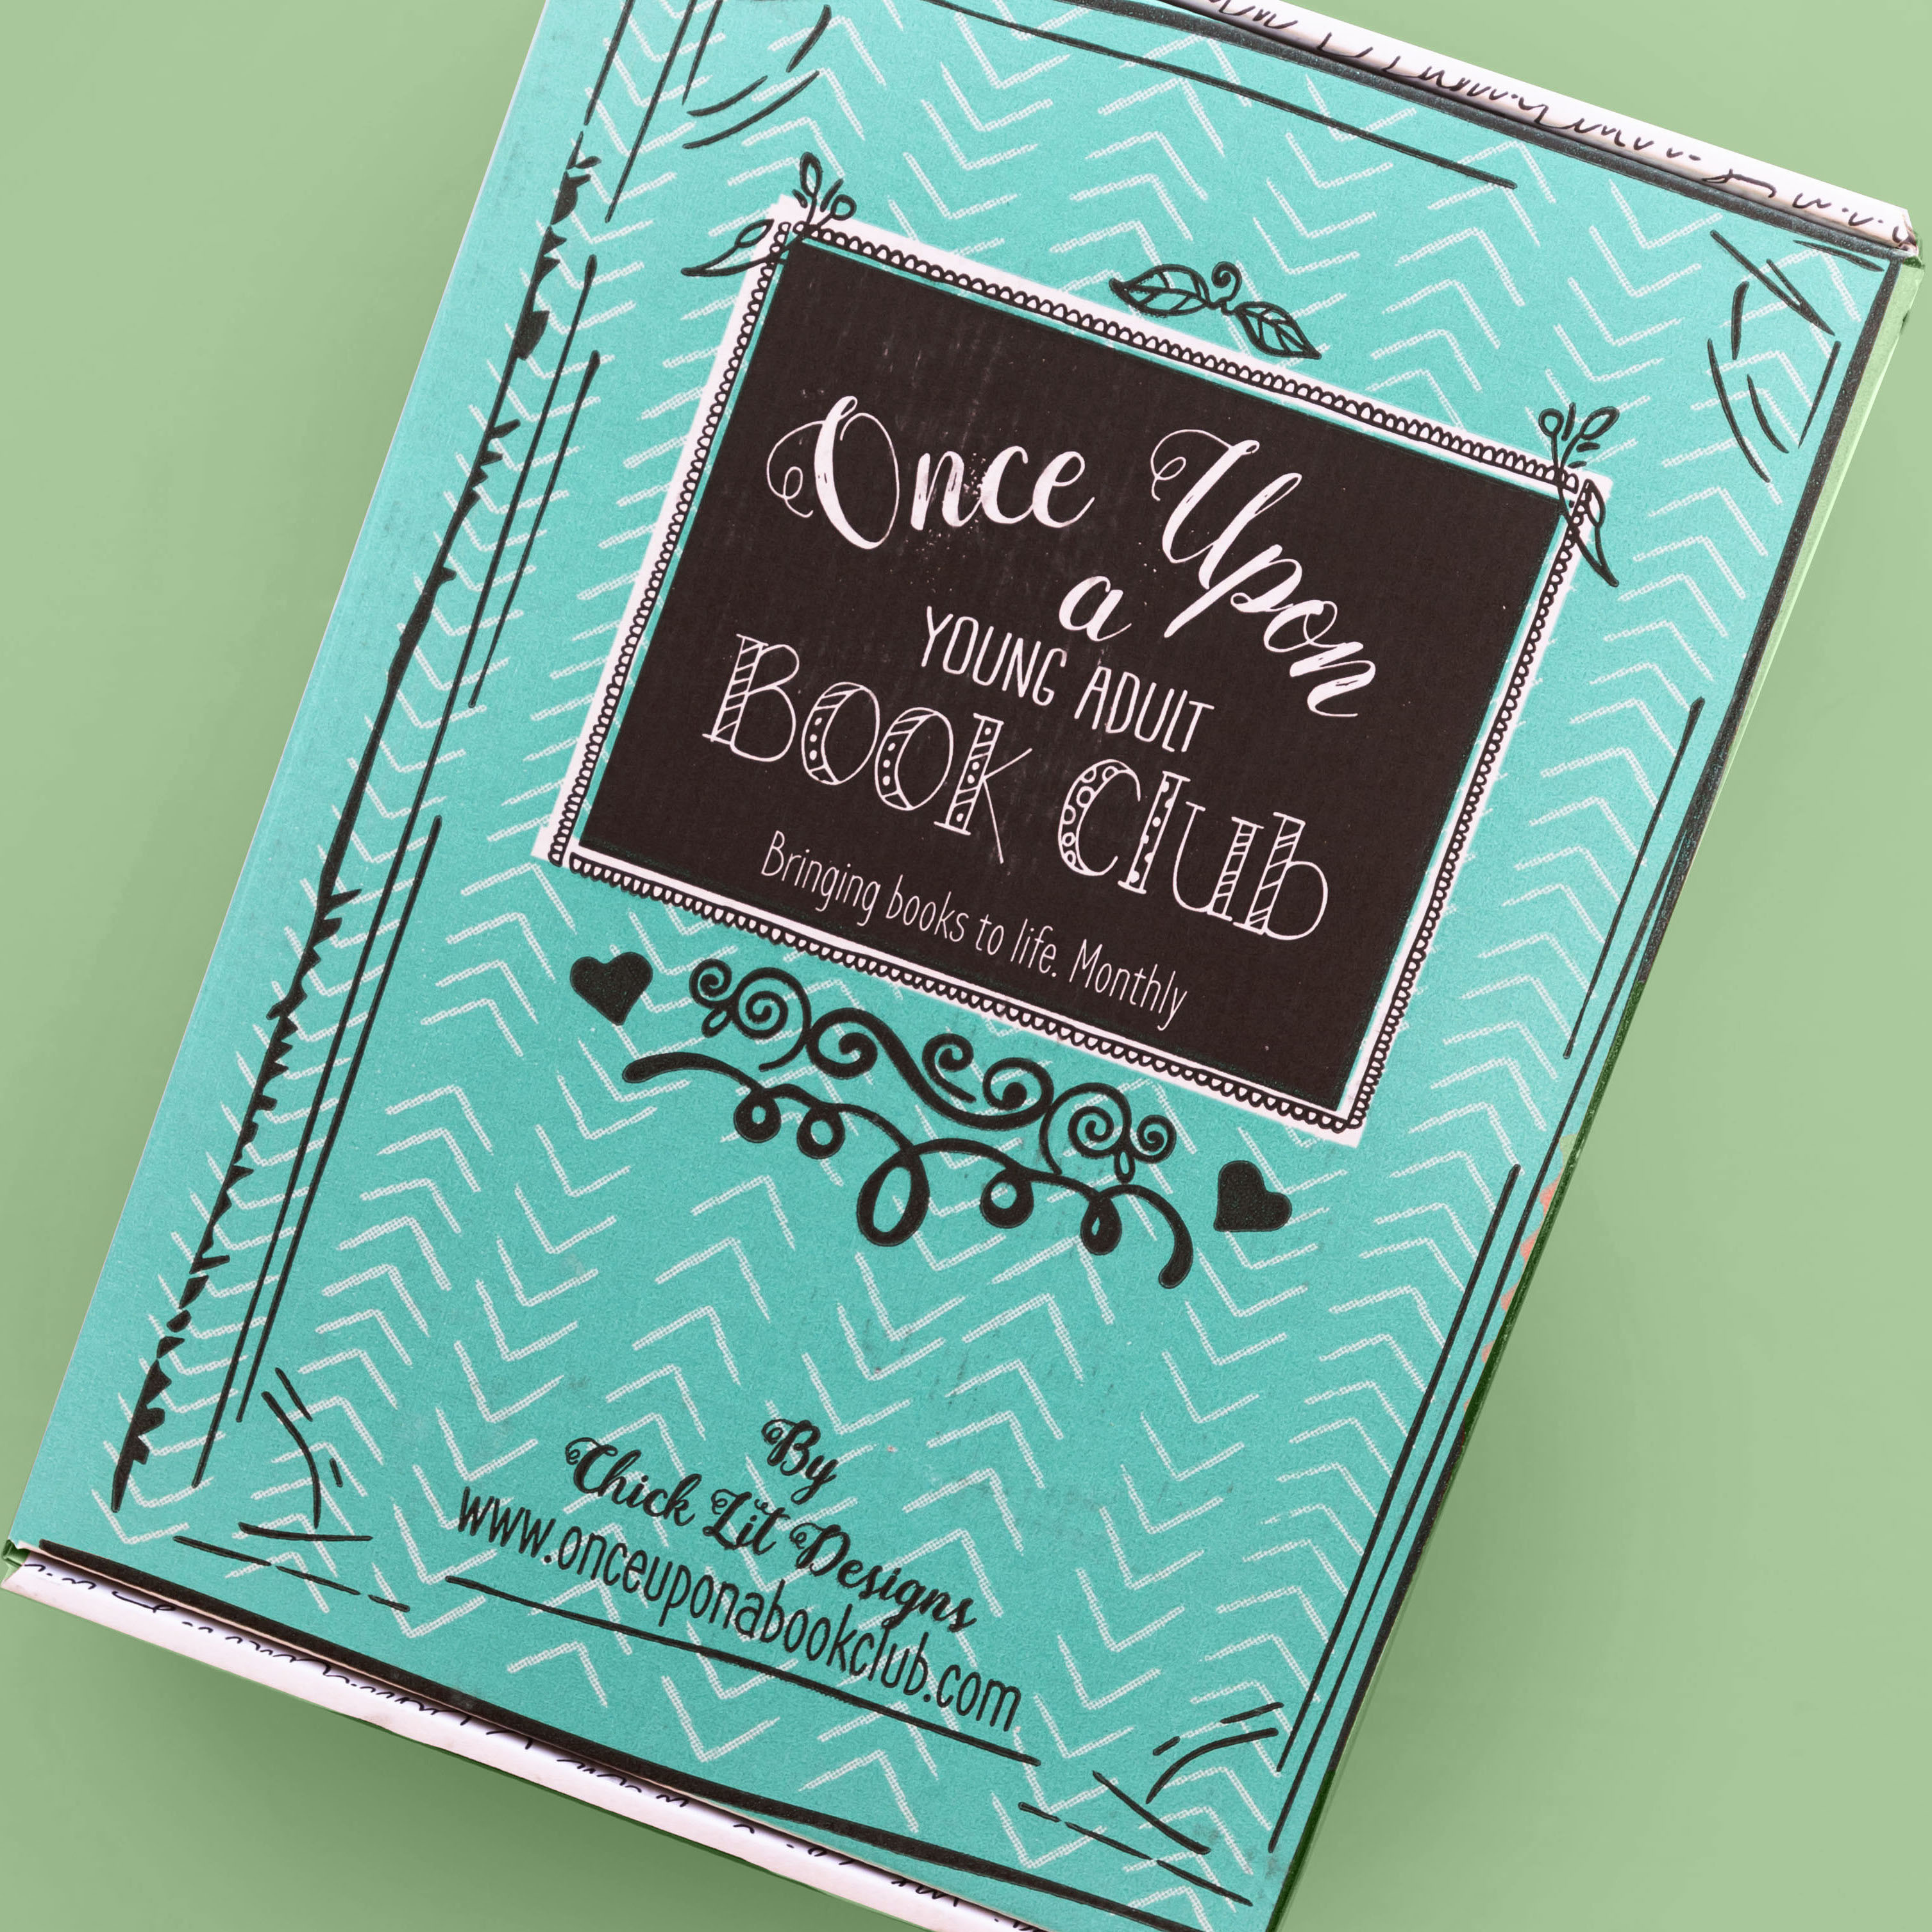 Once Upon a Book Club Box (Young Adult Edition)